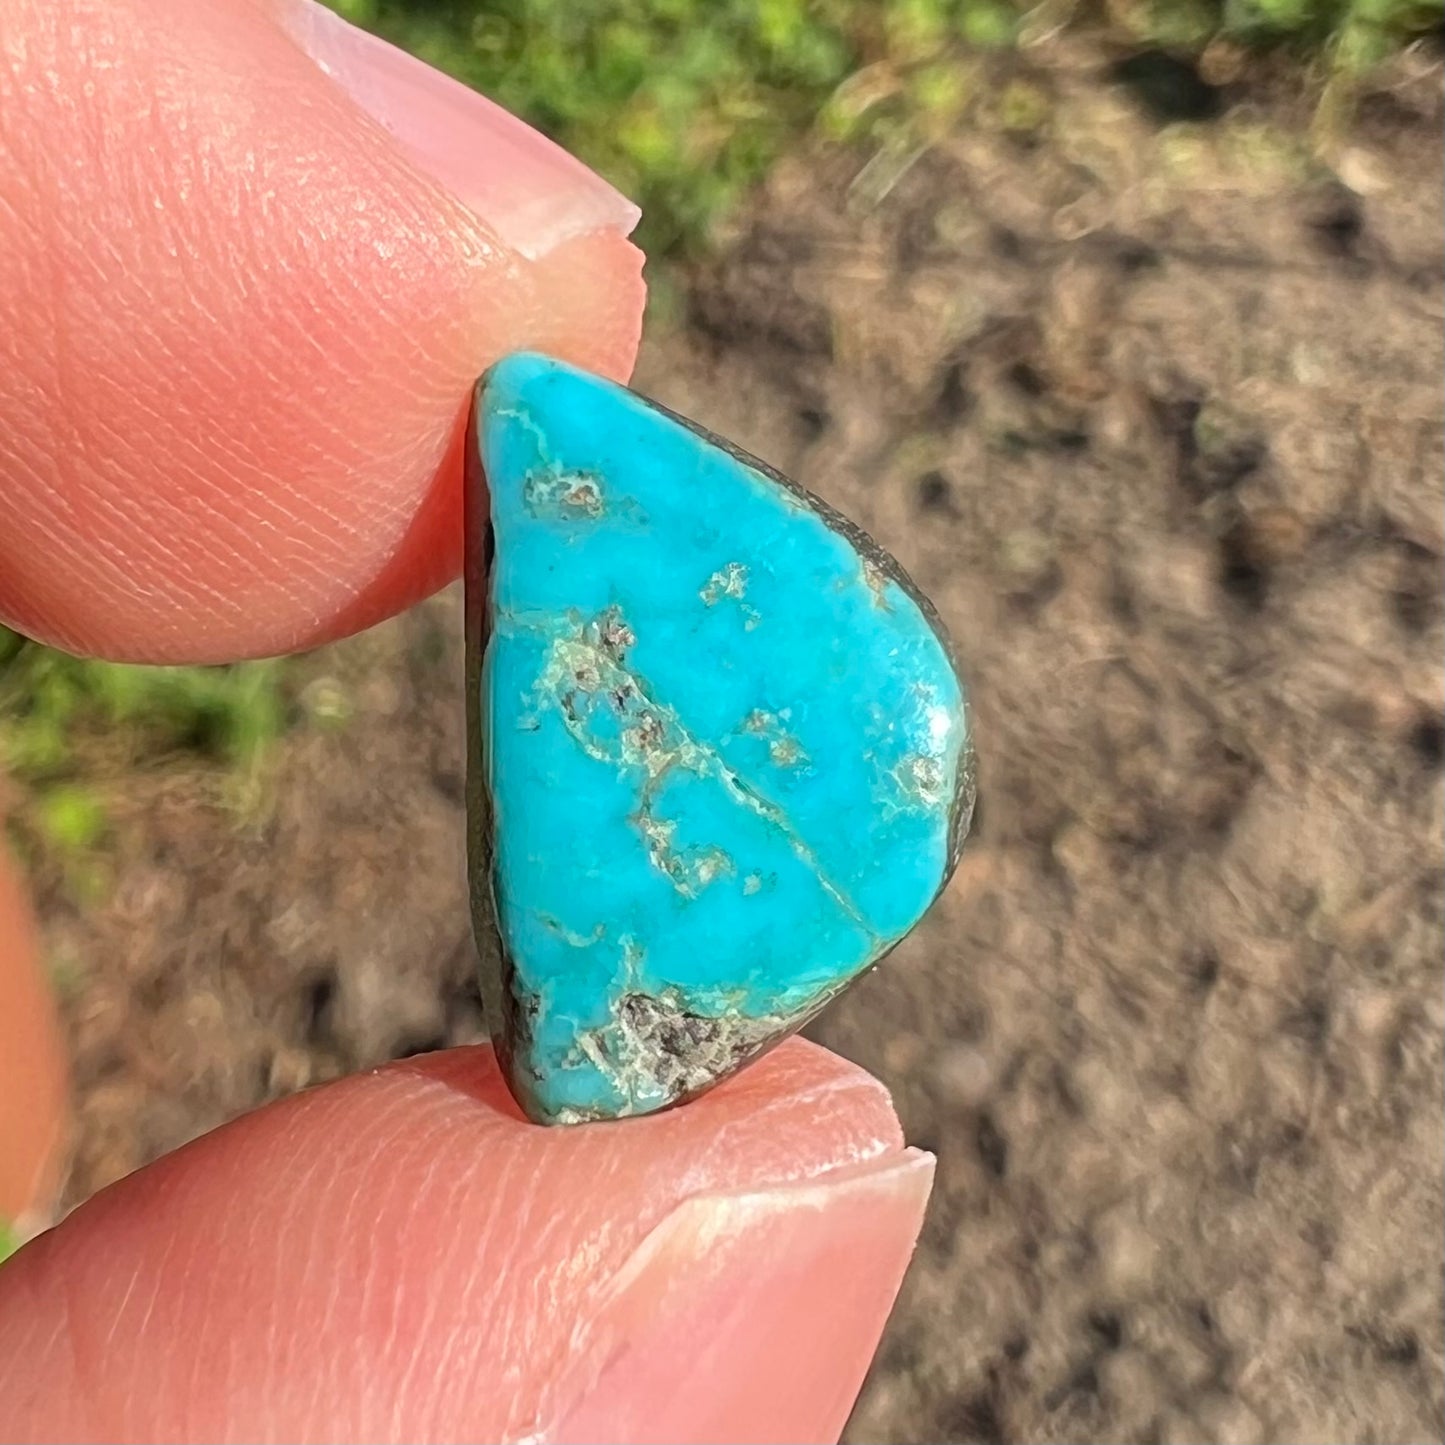 A loose, freeform cabochon cut Kingman turquoise stone.  The stone is bright blue.